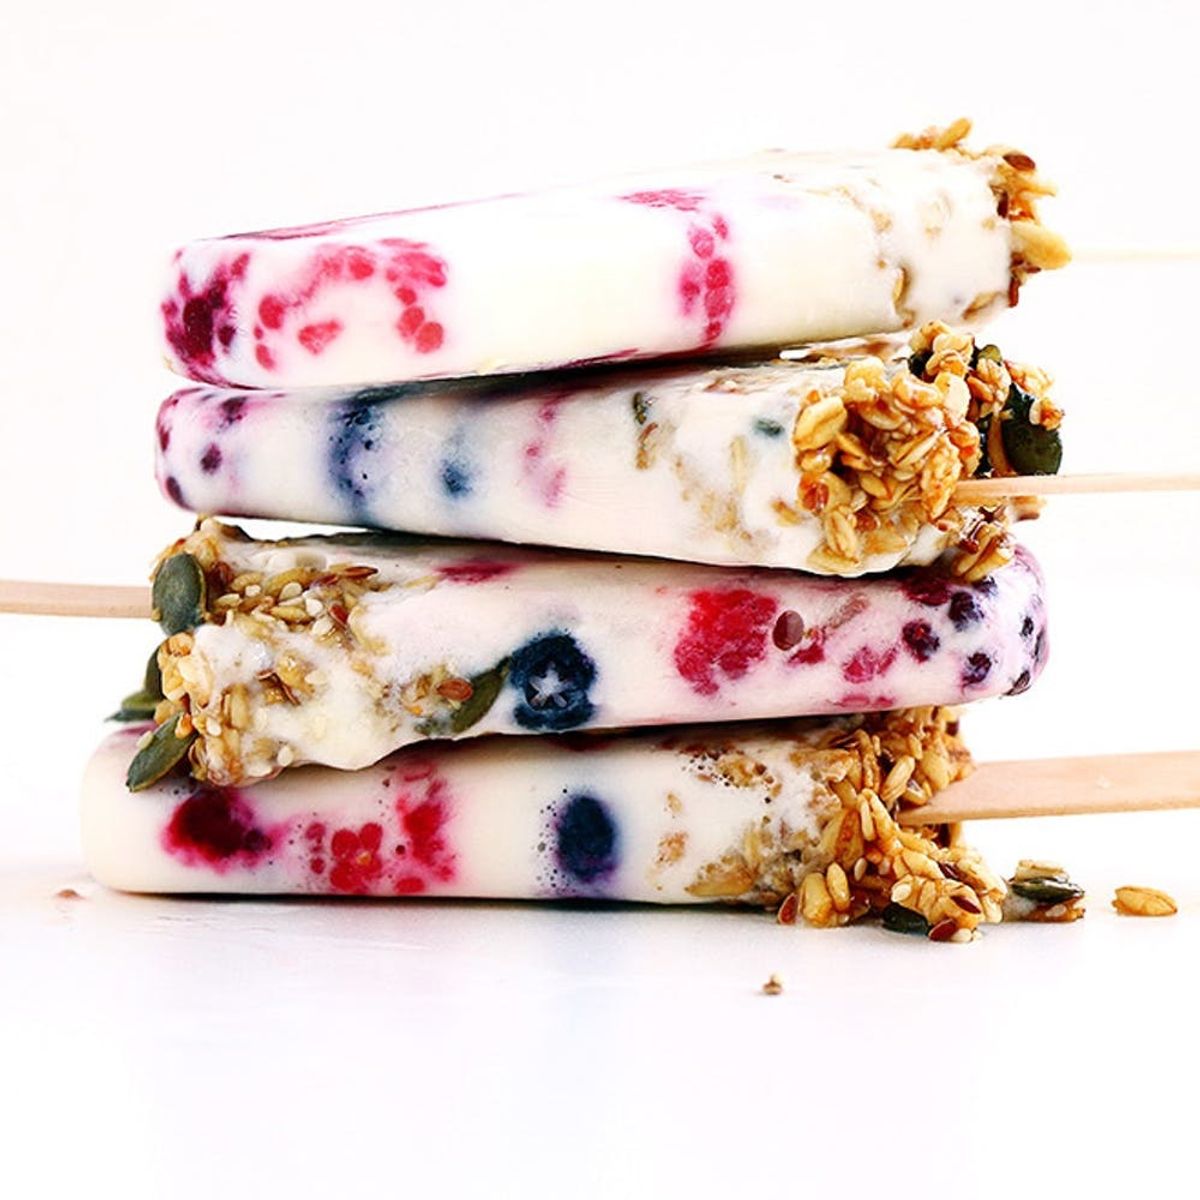 14 Tasty Breakfast Popsicles to Start Your Morning Off Right